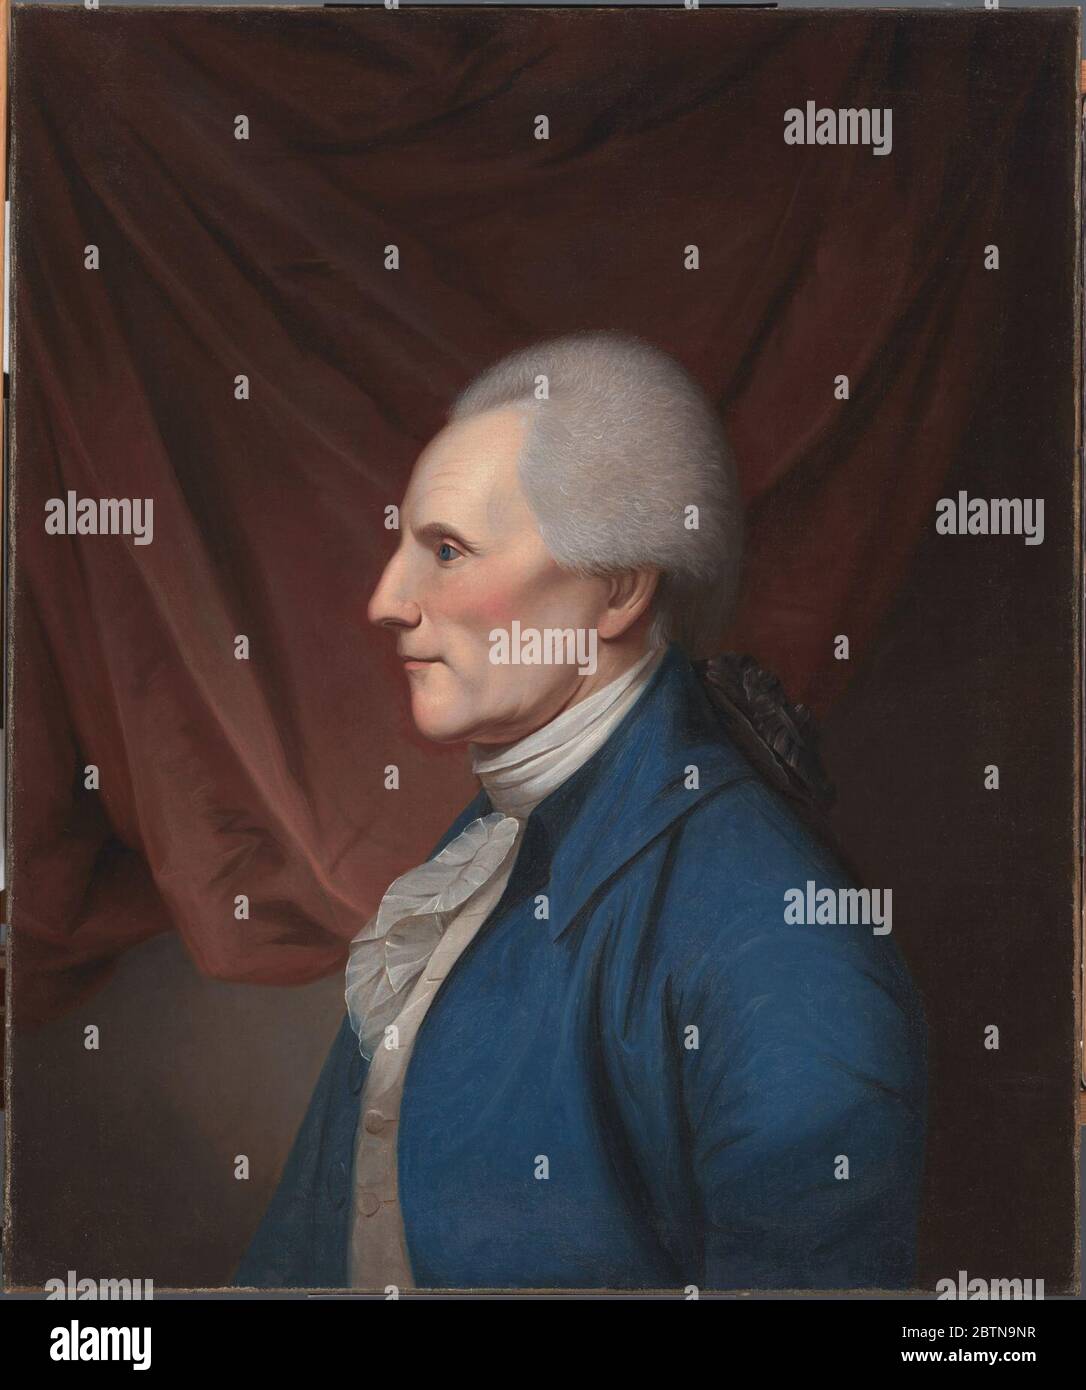 Richard Henry Lee. On June 7, 1776, it fell to Richard Henry Lee, delegate from Virginia at the Second Continental Congress, to offer the resolution that 'these United Colonies are, and of right ought to be, free and independent States.'Lee was a tobacco planter and a seasoned member of the Virgini Stock Photo